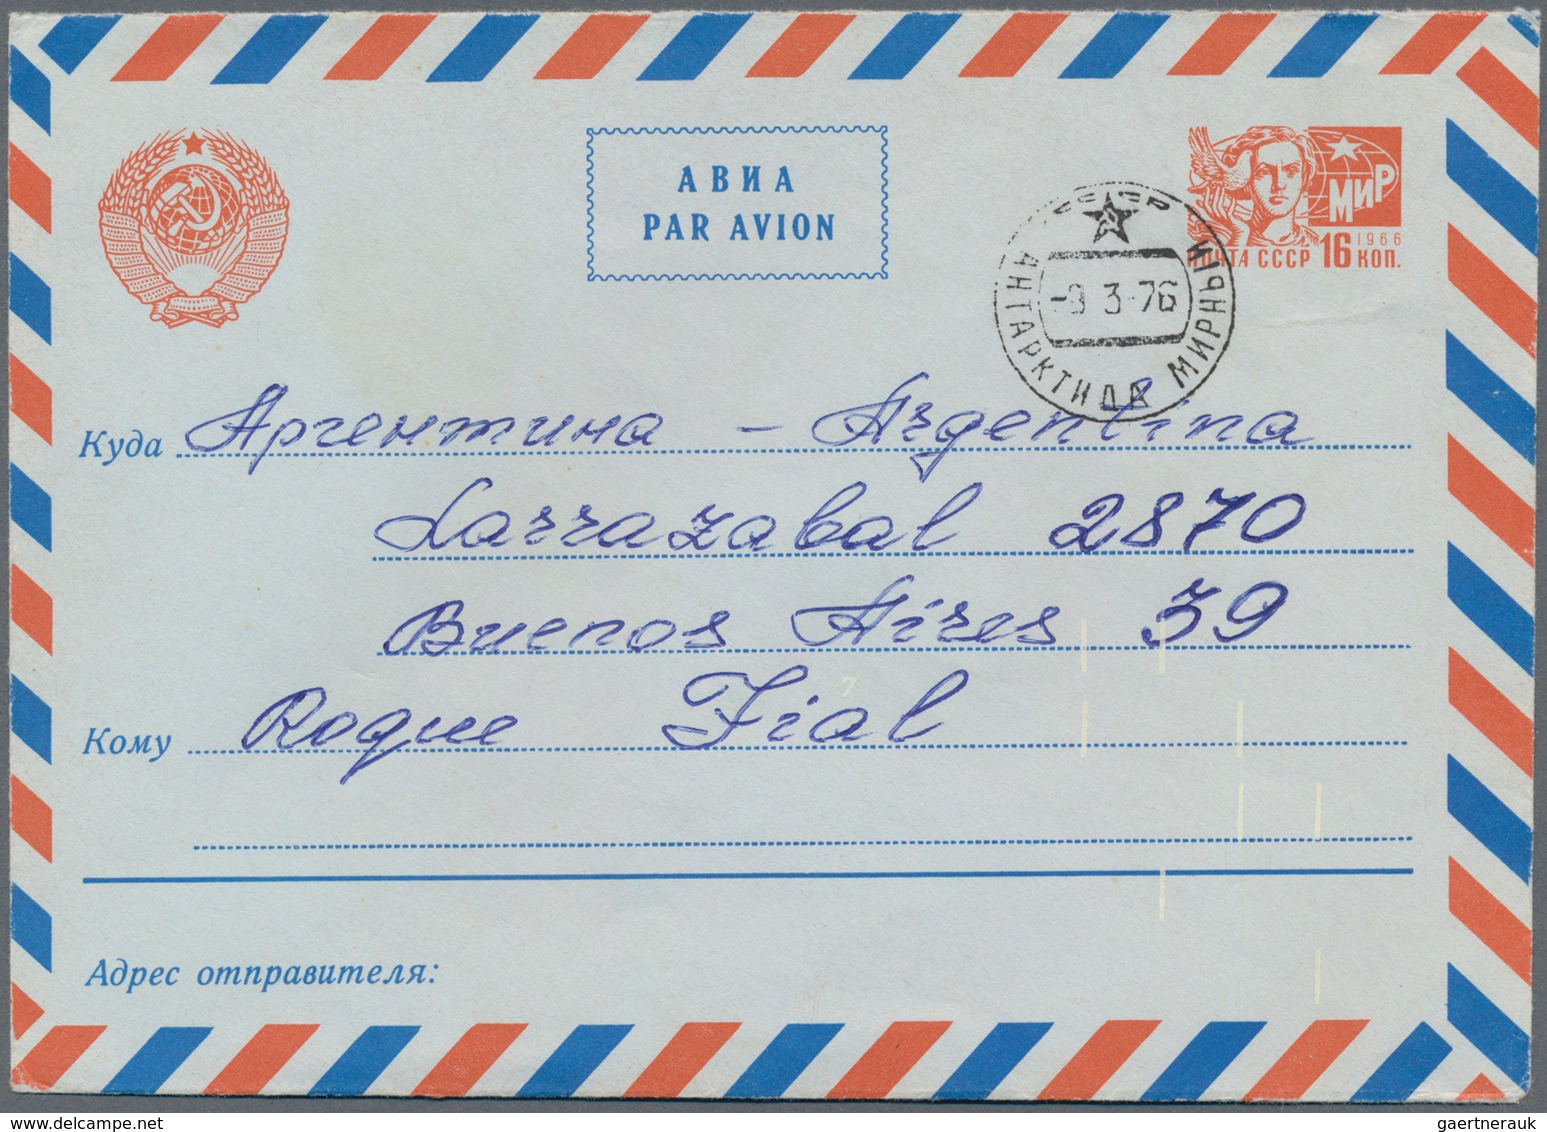 Sowjetunion - Ganzsachen: 1967 Postal Stationery Standard Envelope Of The 11th Continuous Series Wit - Ohne Zuordnung